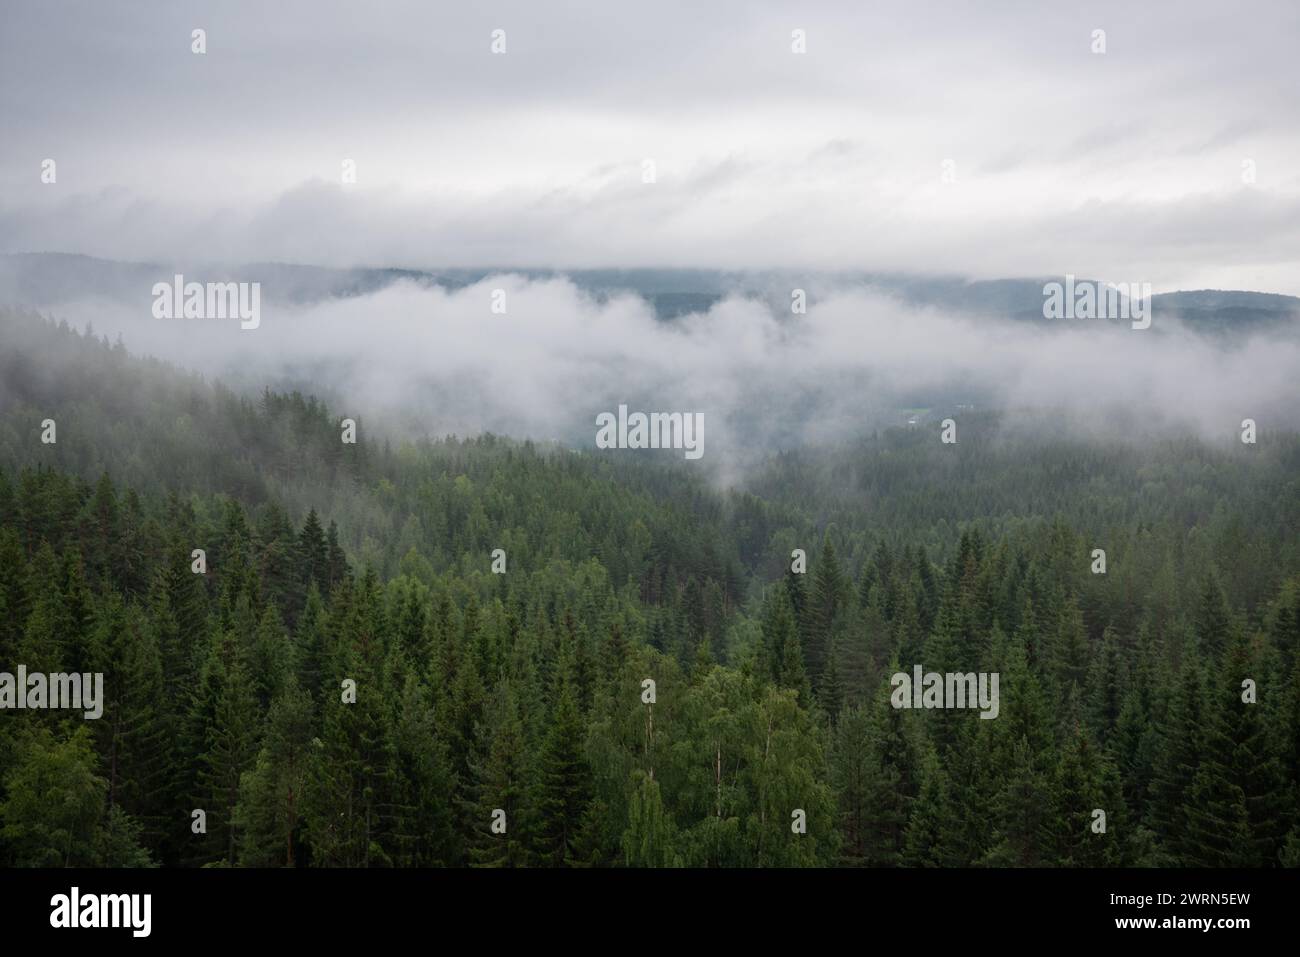 Landscape with green spruce forest in white fog where Norwegian mountains and fjords can be seen in the distance. Stock Photo